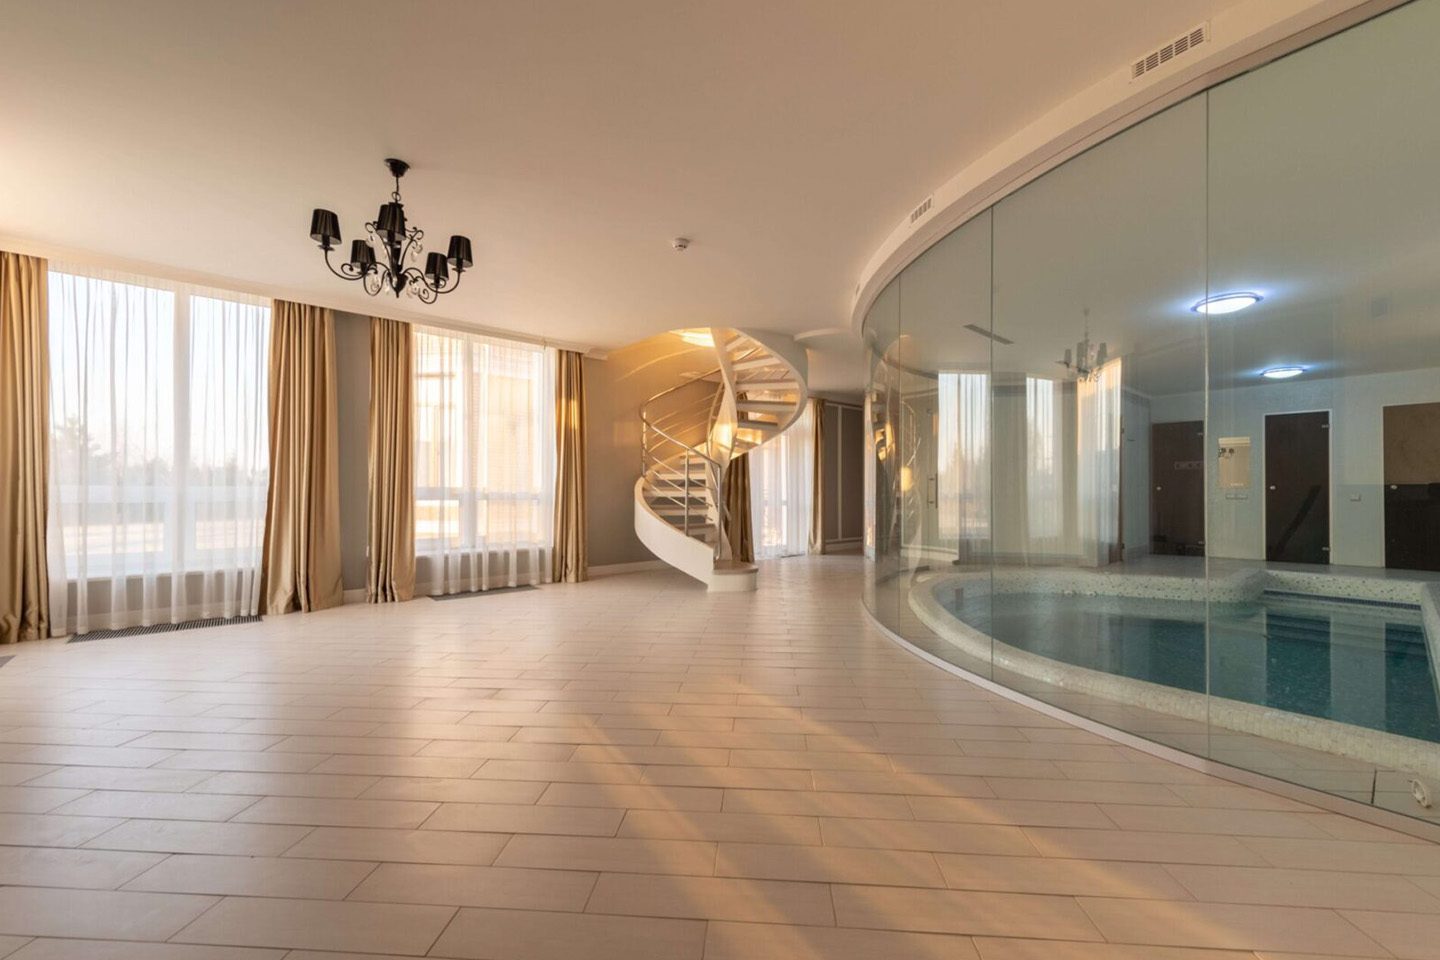 A large room with a pool and stairs.